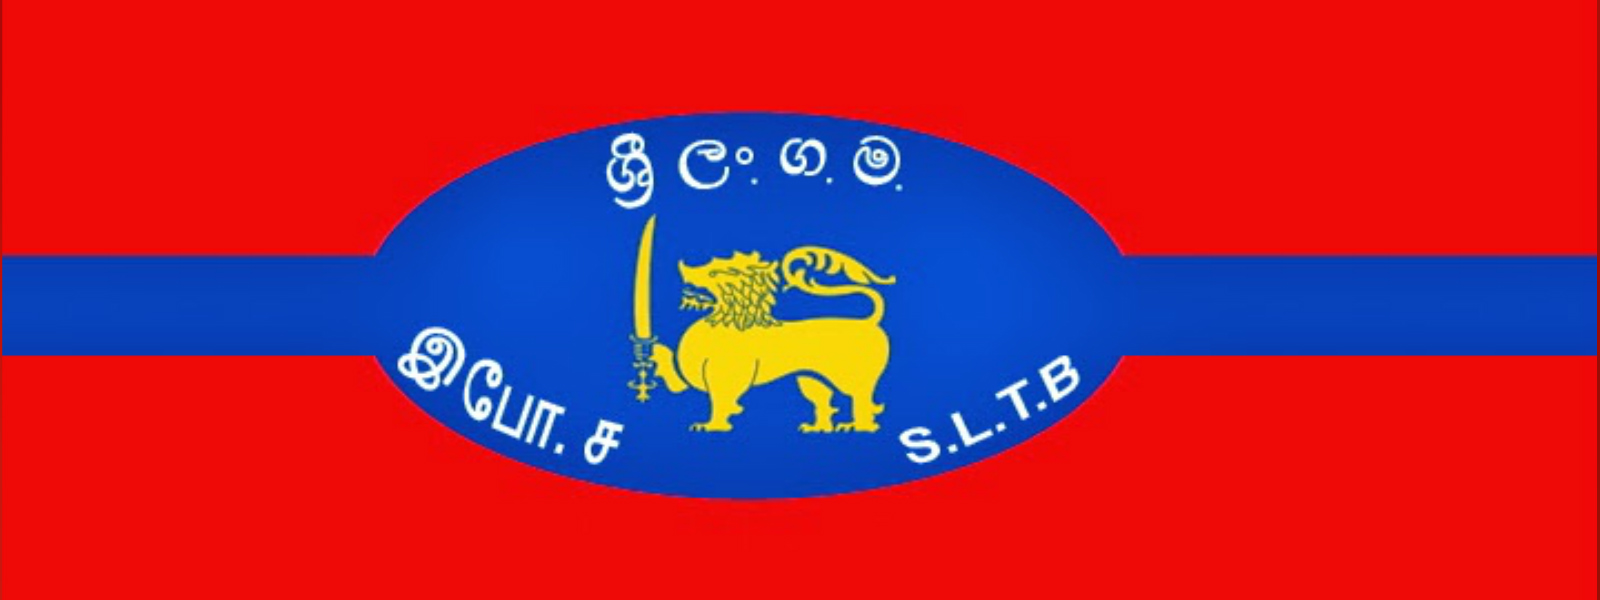 Strike action by SLTB workers called off